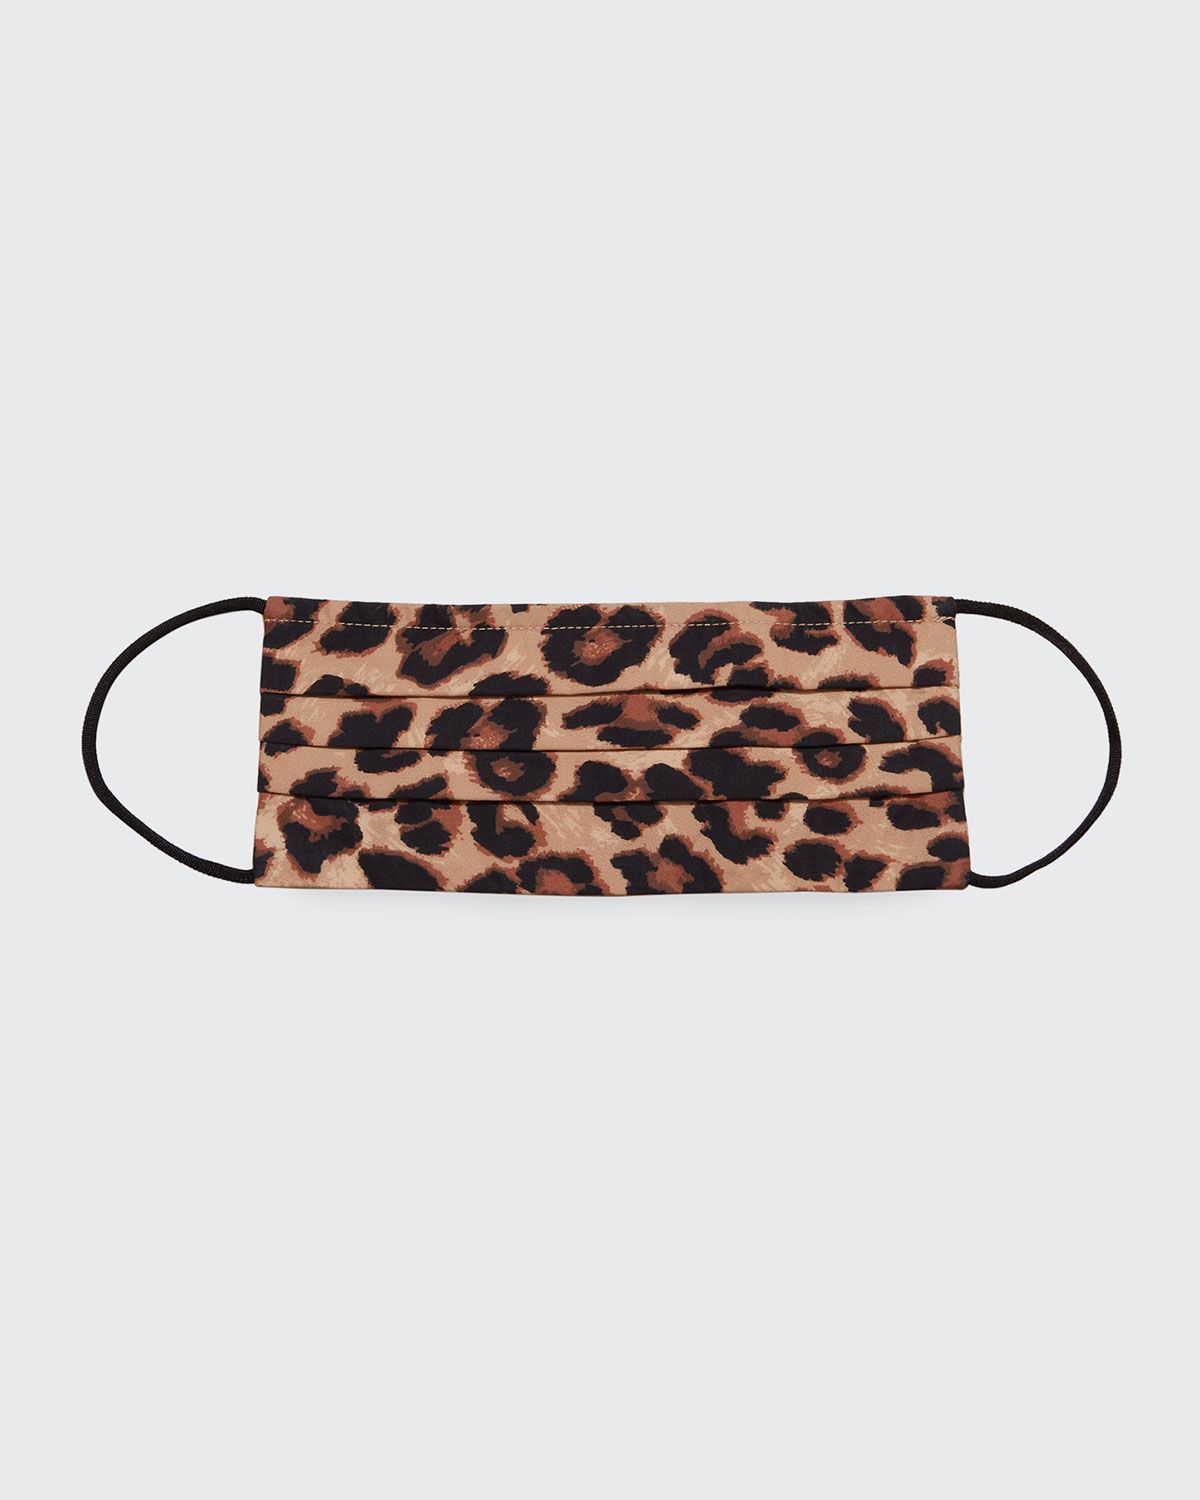 Reusable Leopard-Print Cotton Mask Face Covering with Nose Wire | Neiman Marcus